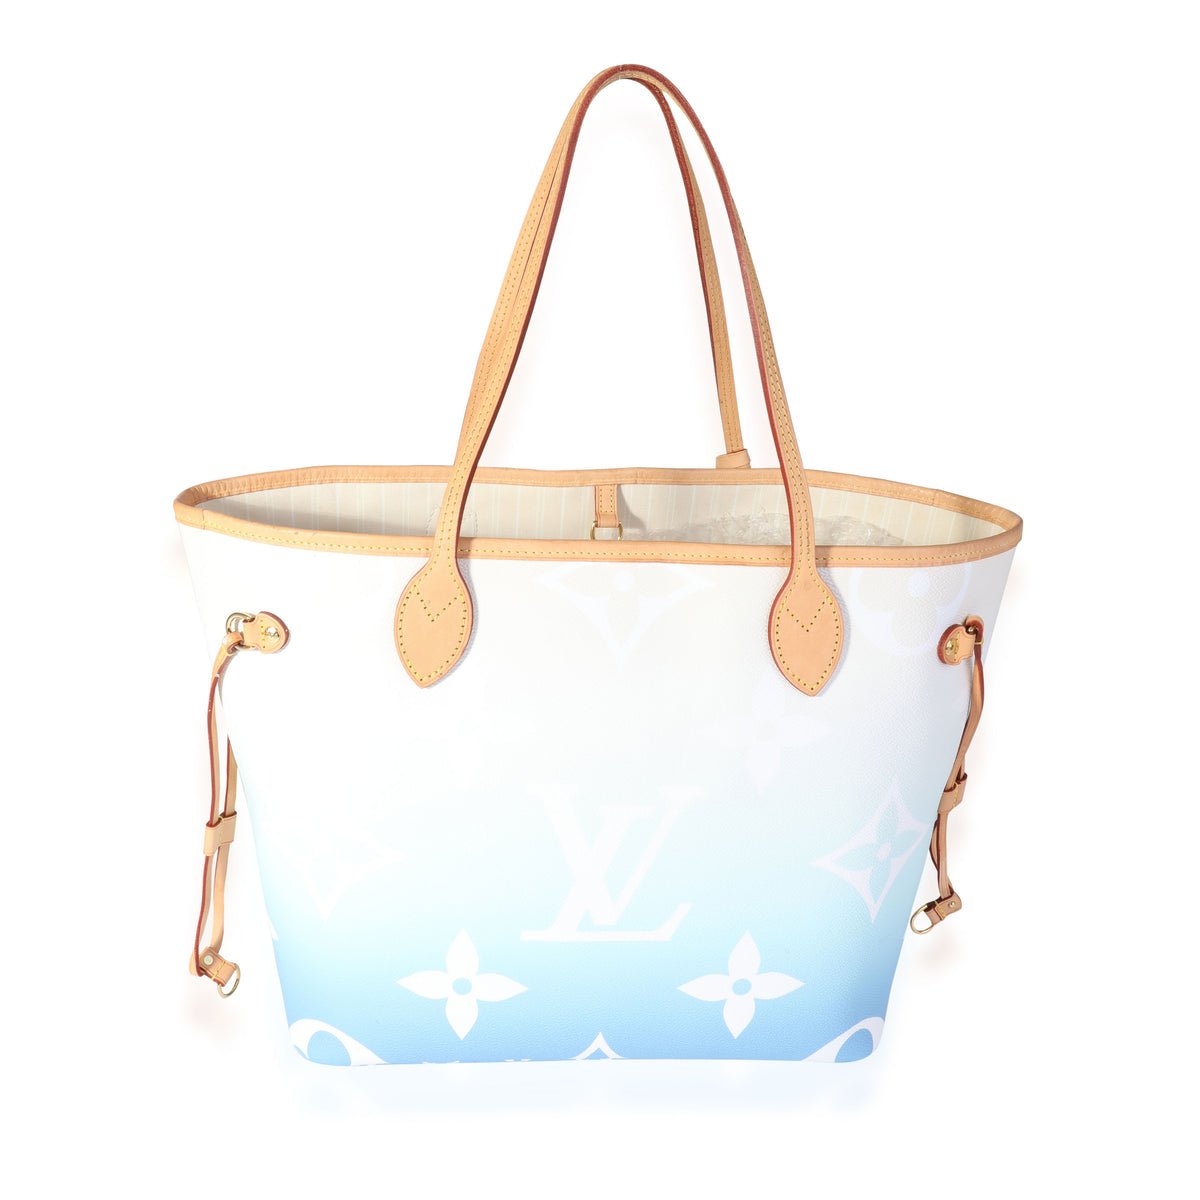 Louis Vuitton Blue White Giant Monogram Canvas By The Pool Neverfull MM, myGemma, CH